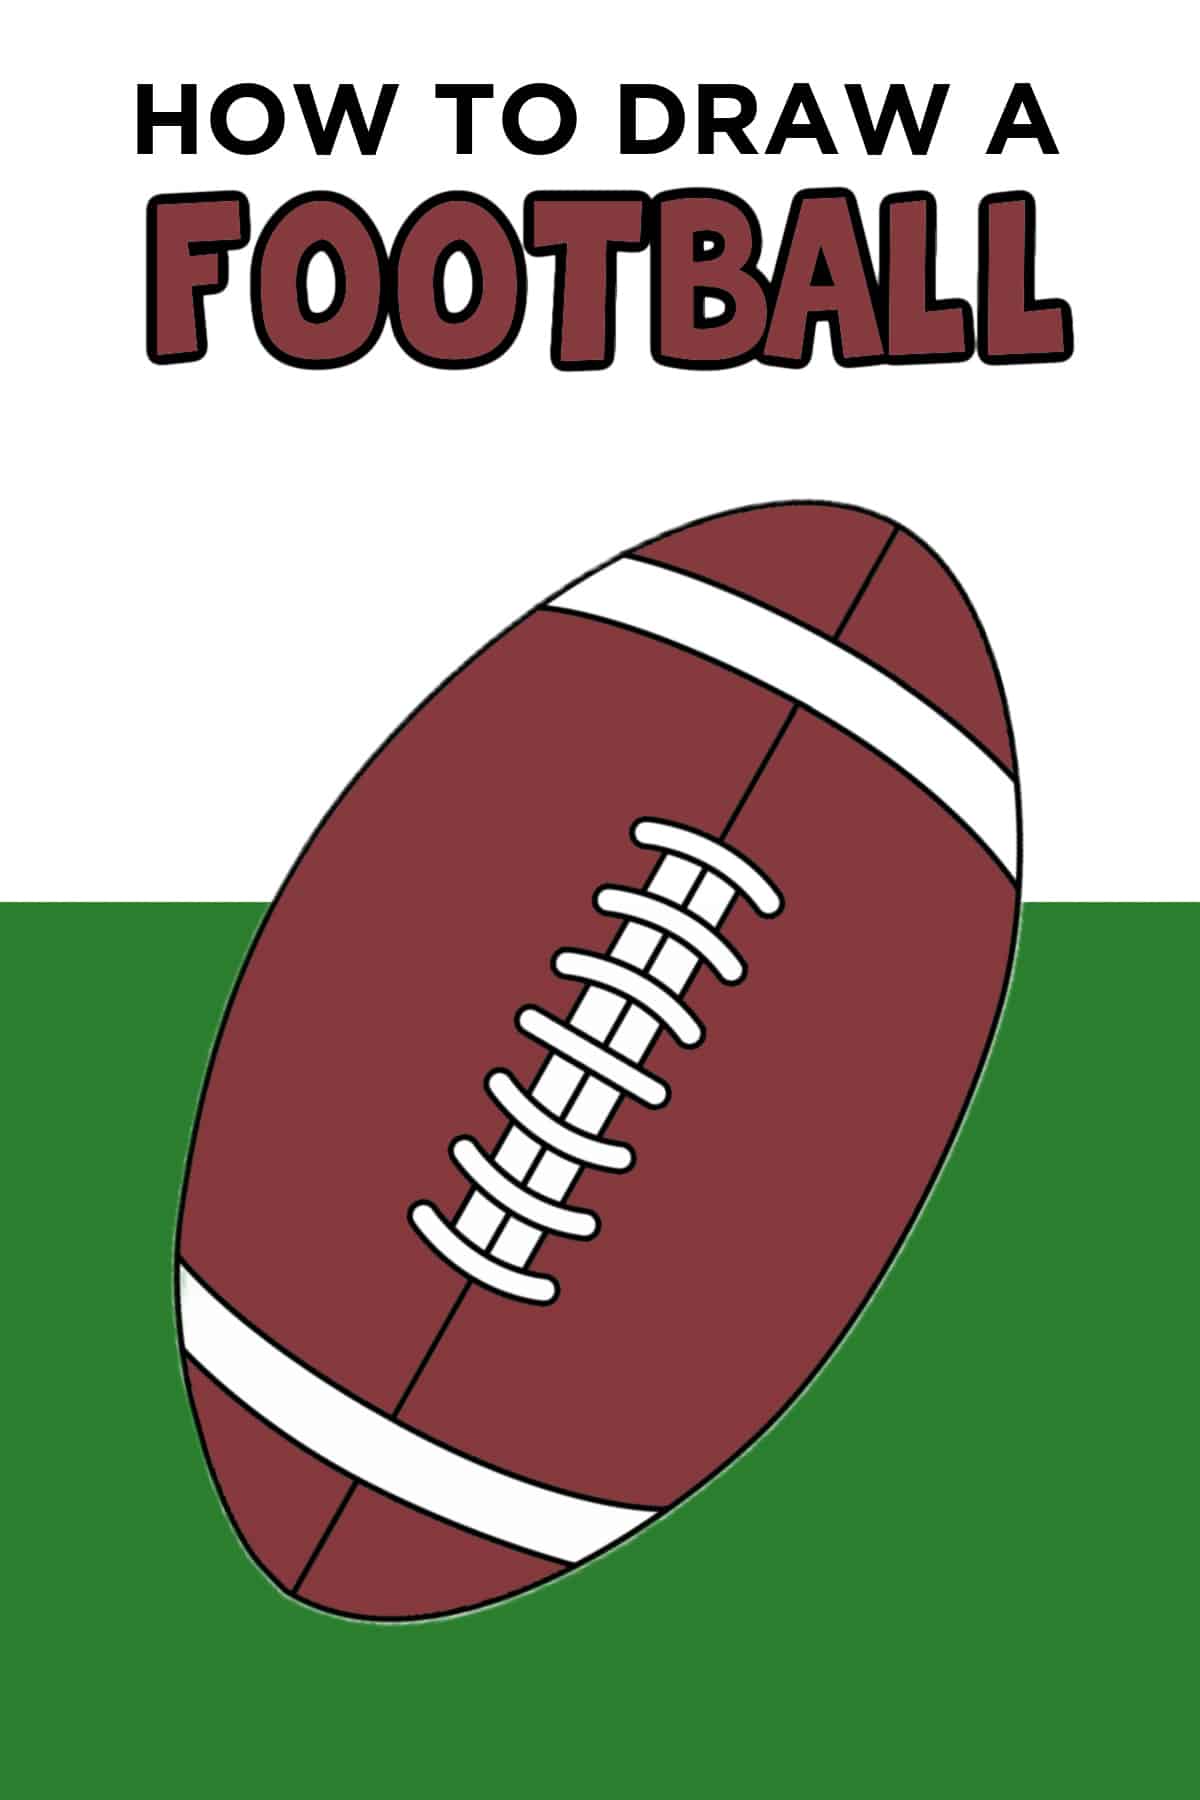 Football drawing - Coloring pages Child